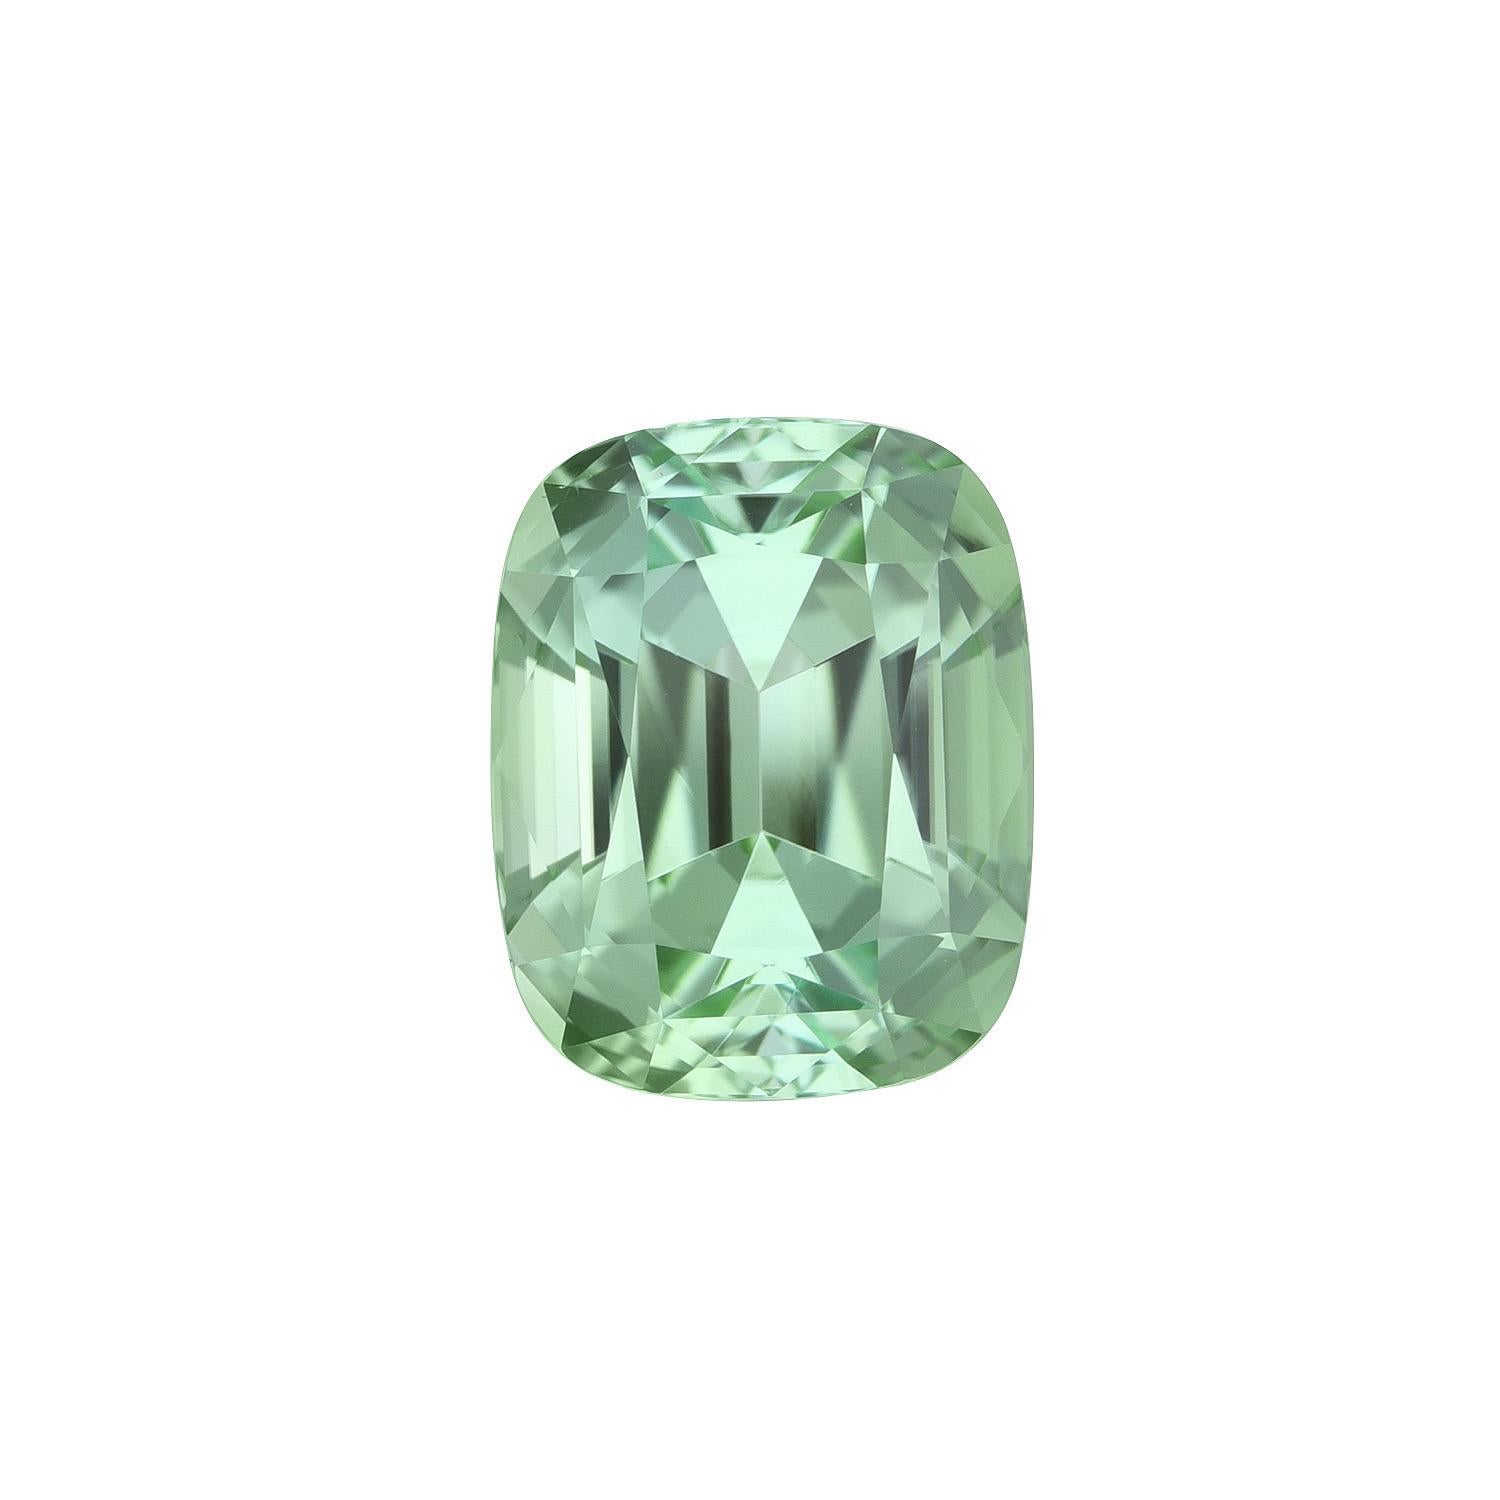 Gorgeous 4.78 carat Mint Green Tourmaline cushion loose gemstone, offered unmounted to a devoted gem lover.
Dimensions: 10.8 x 8.6 x 7.2 mm.
Returns are accepted and paid by us within 7 days of delivery.
We offer supreme custom jewelry work upon